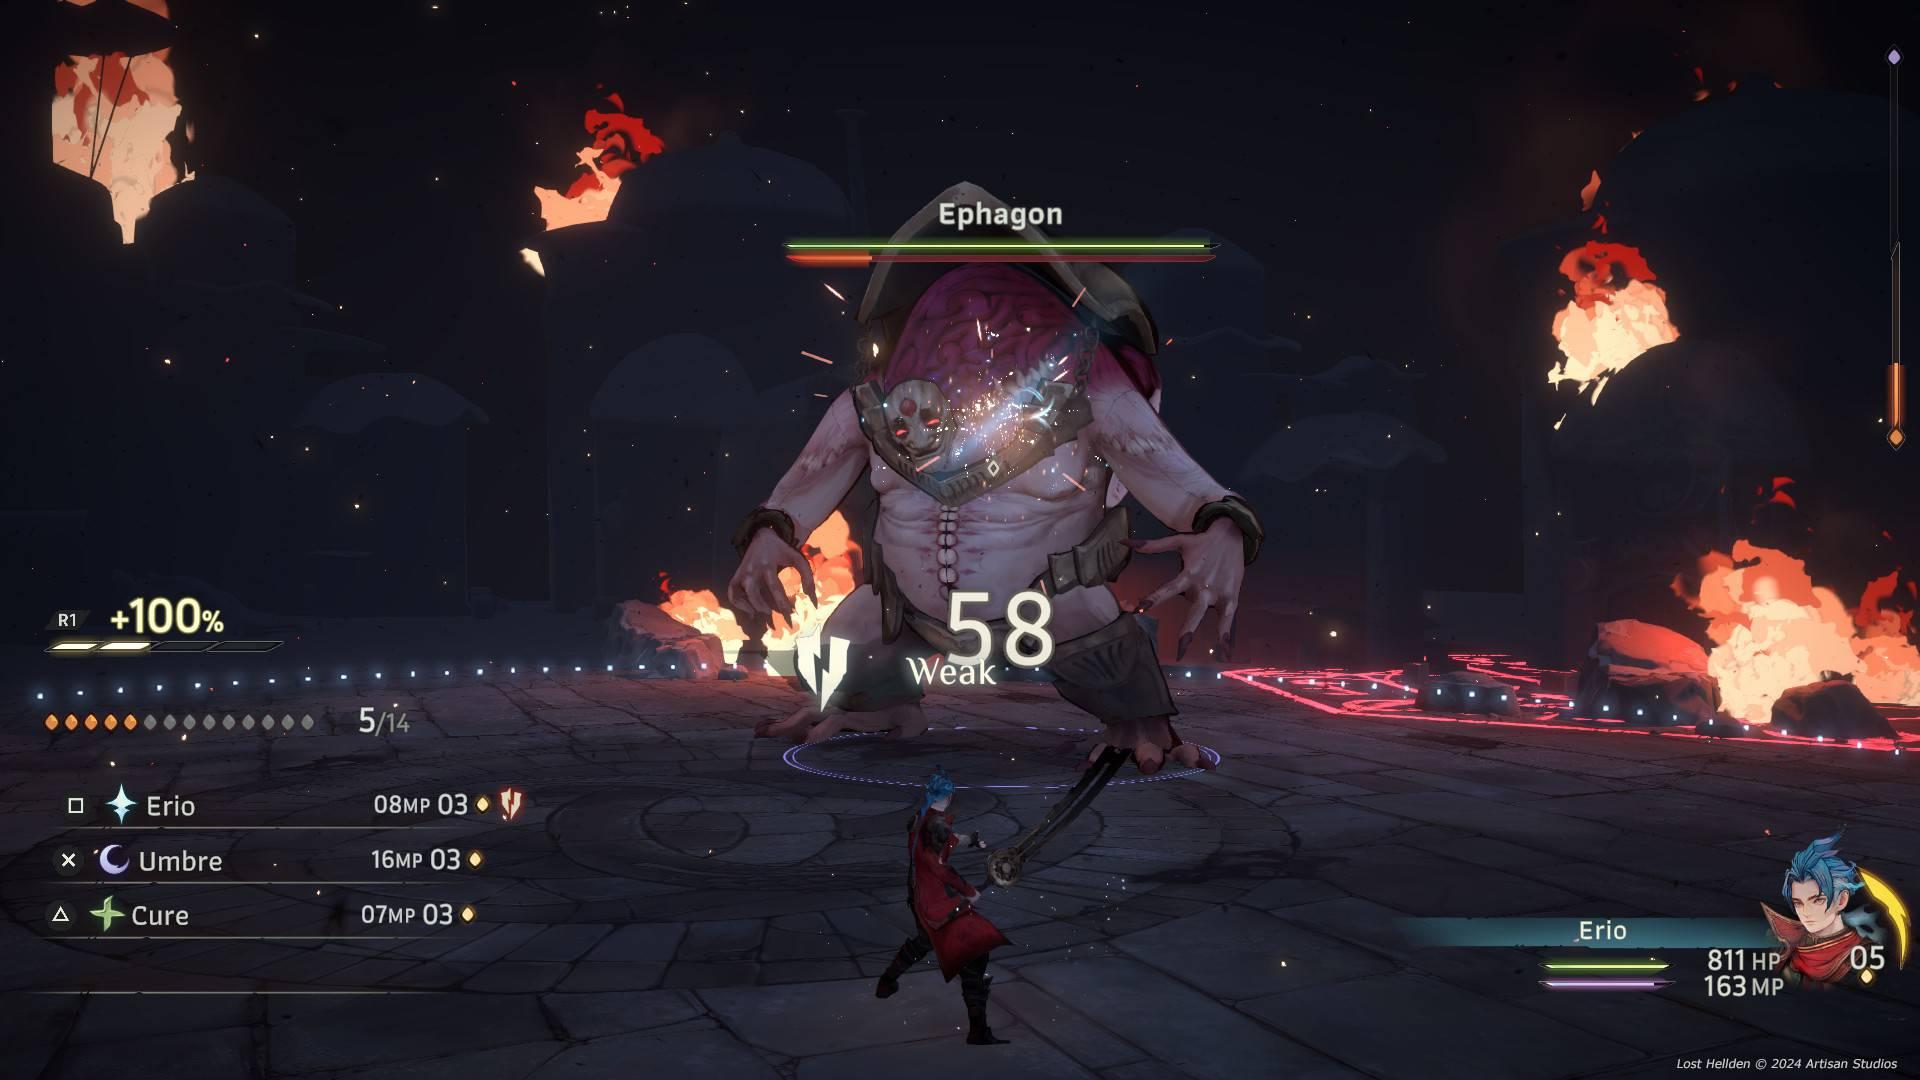 An animated character fighting a hulking boss creature in a dark, firey arena